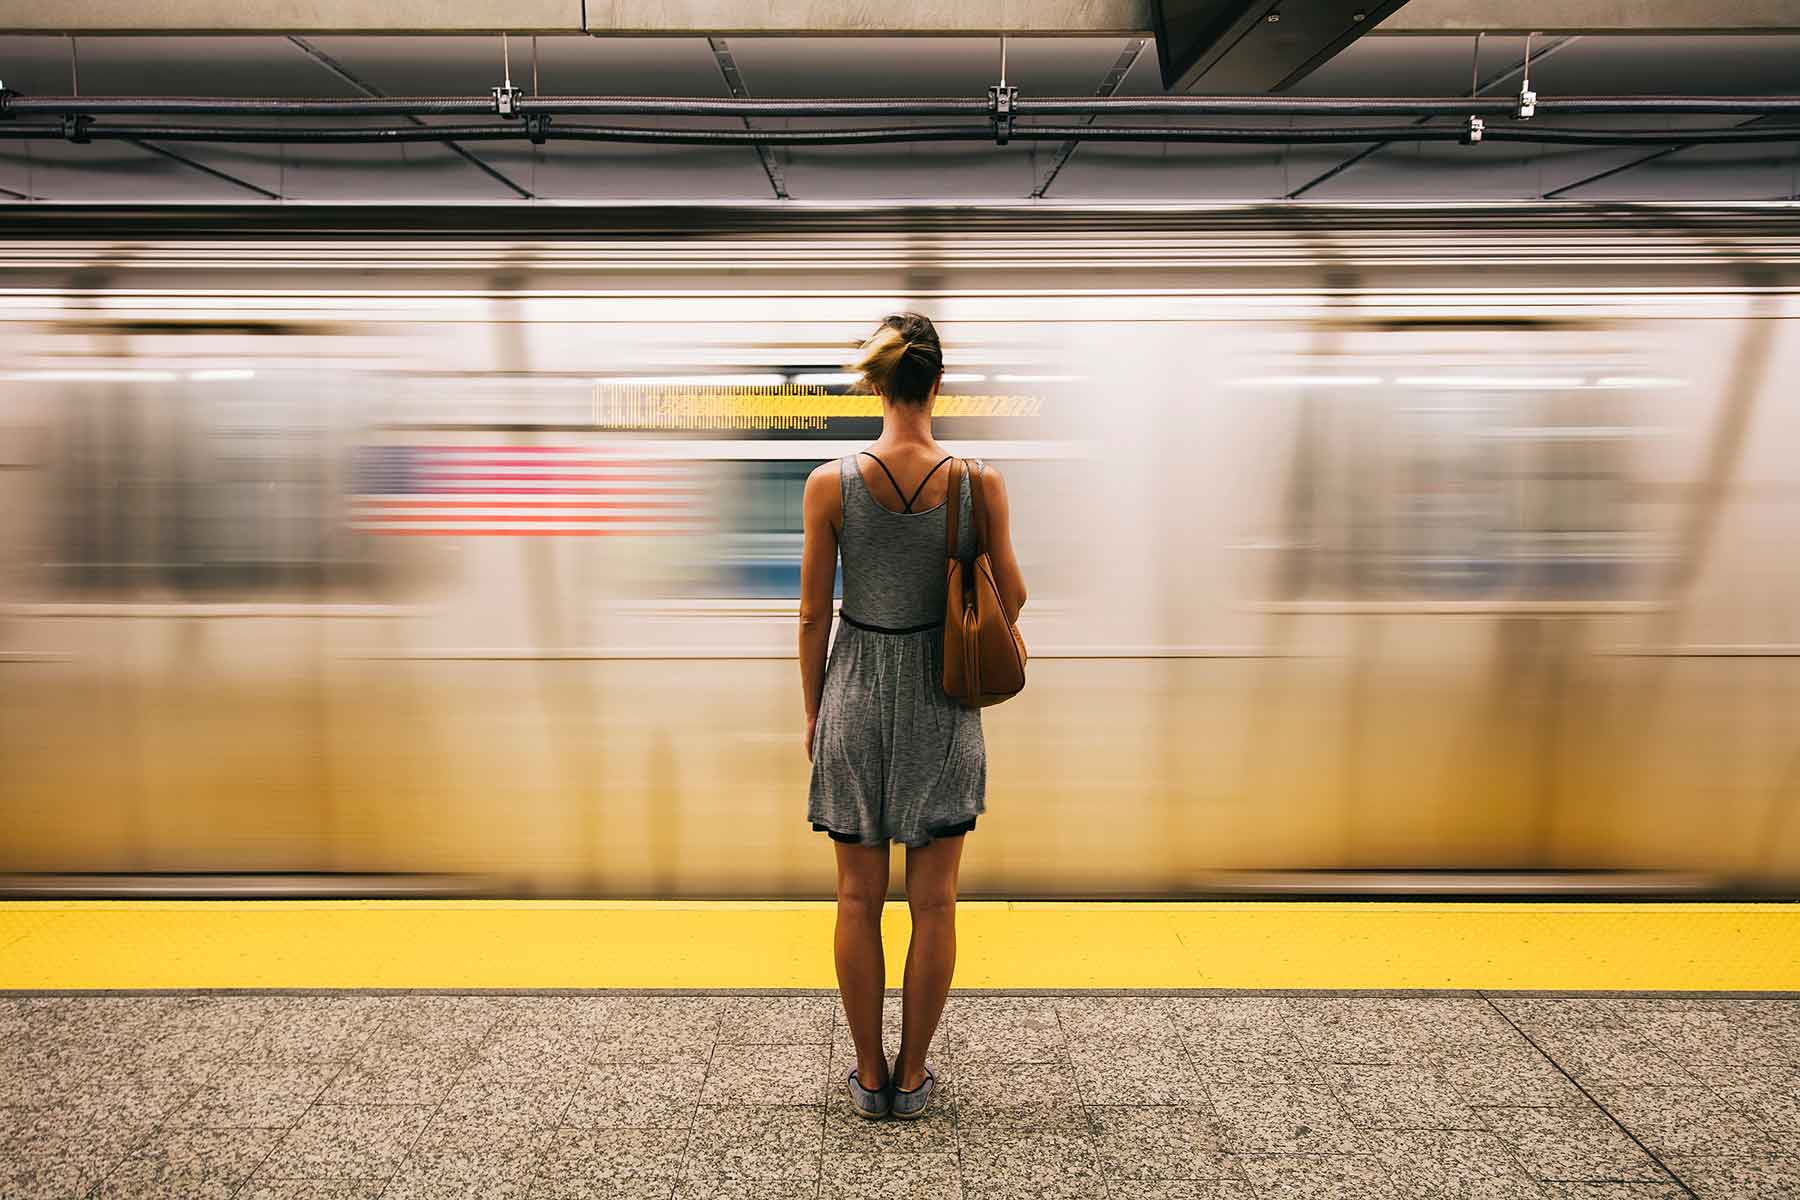 A woman standing on a train platform as the train speedily passes by